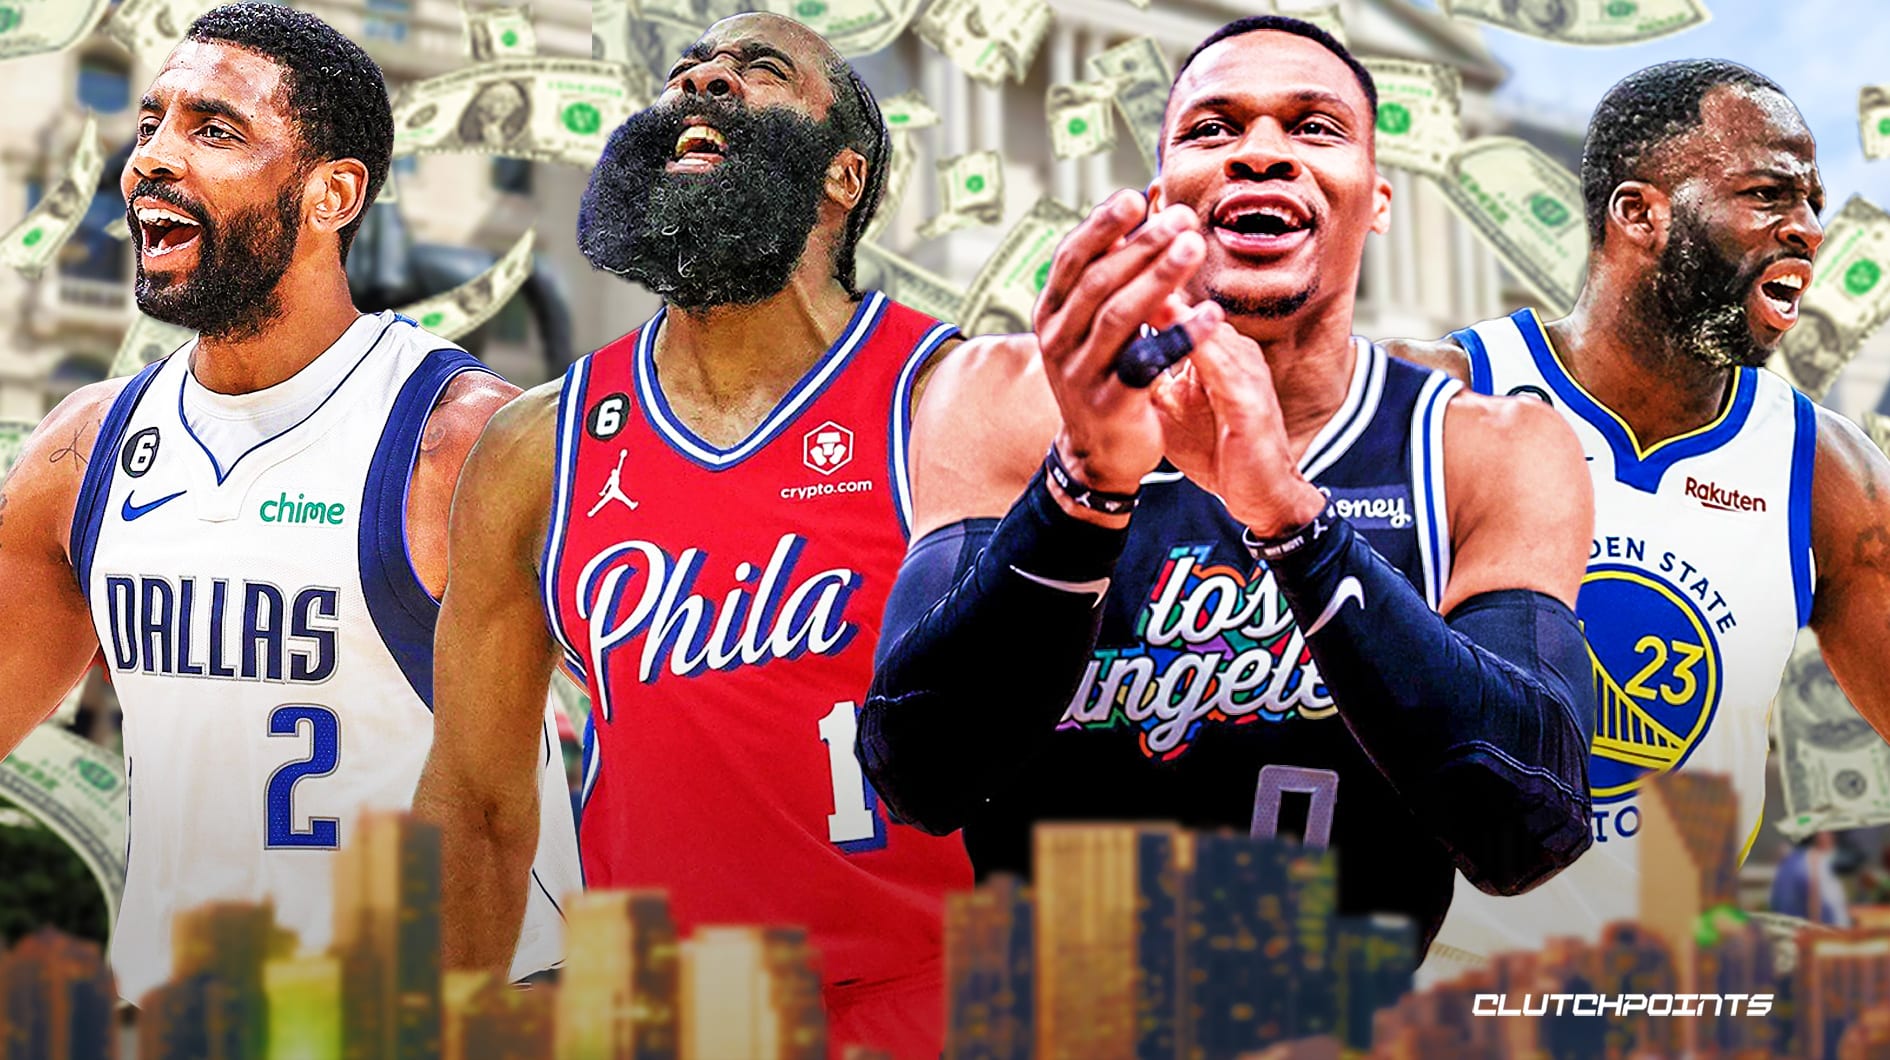 2023 NBA free agents: James Harden, Kyrie Irving lead class